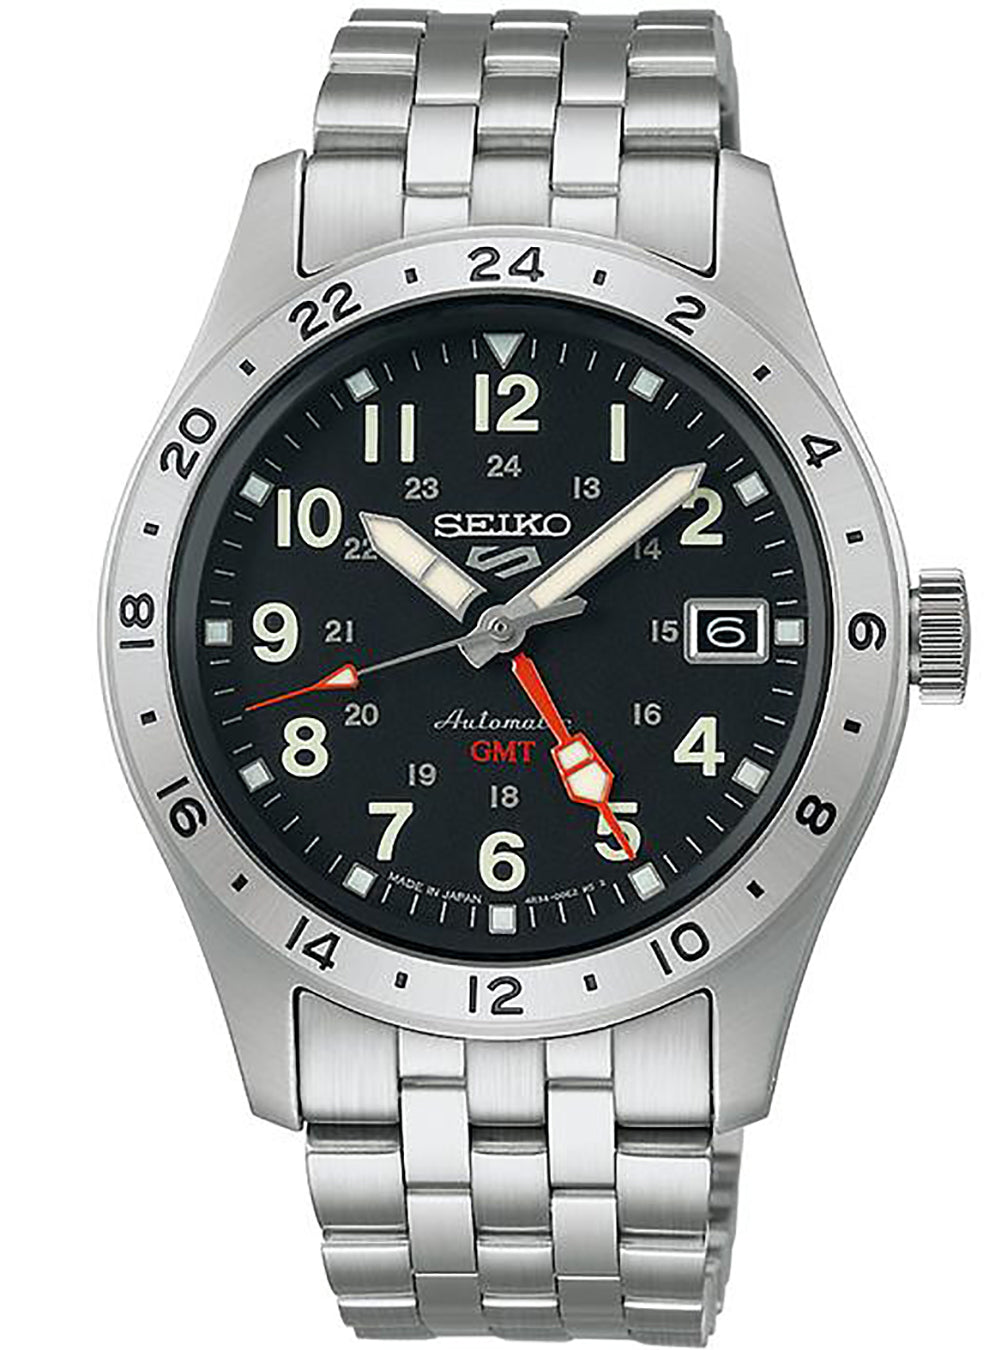 SEIKO 5 SPORTS FIELD SPORTS STYLE GMT MEN'S MADE IN JAPAN JDM